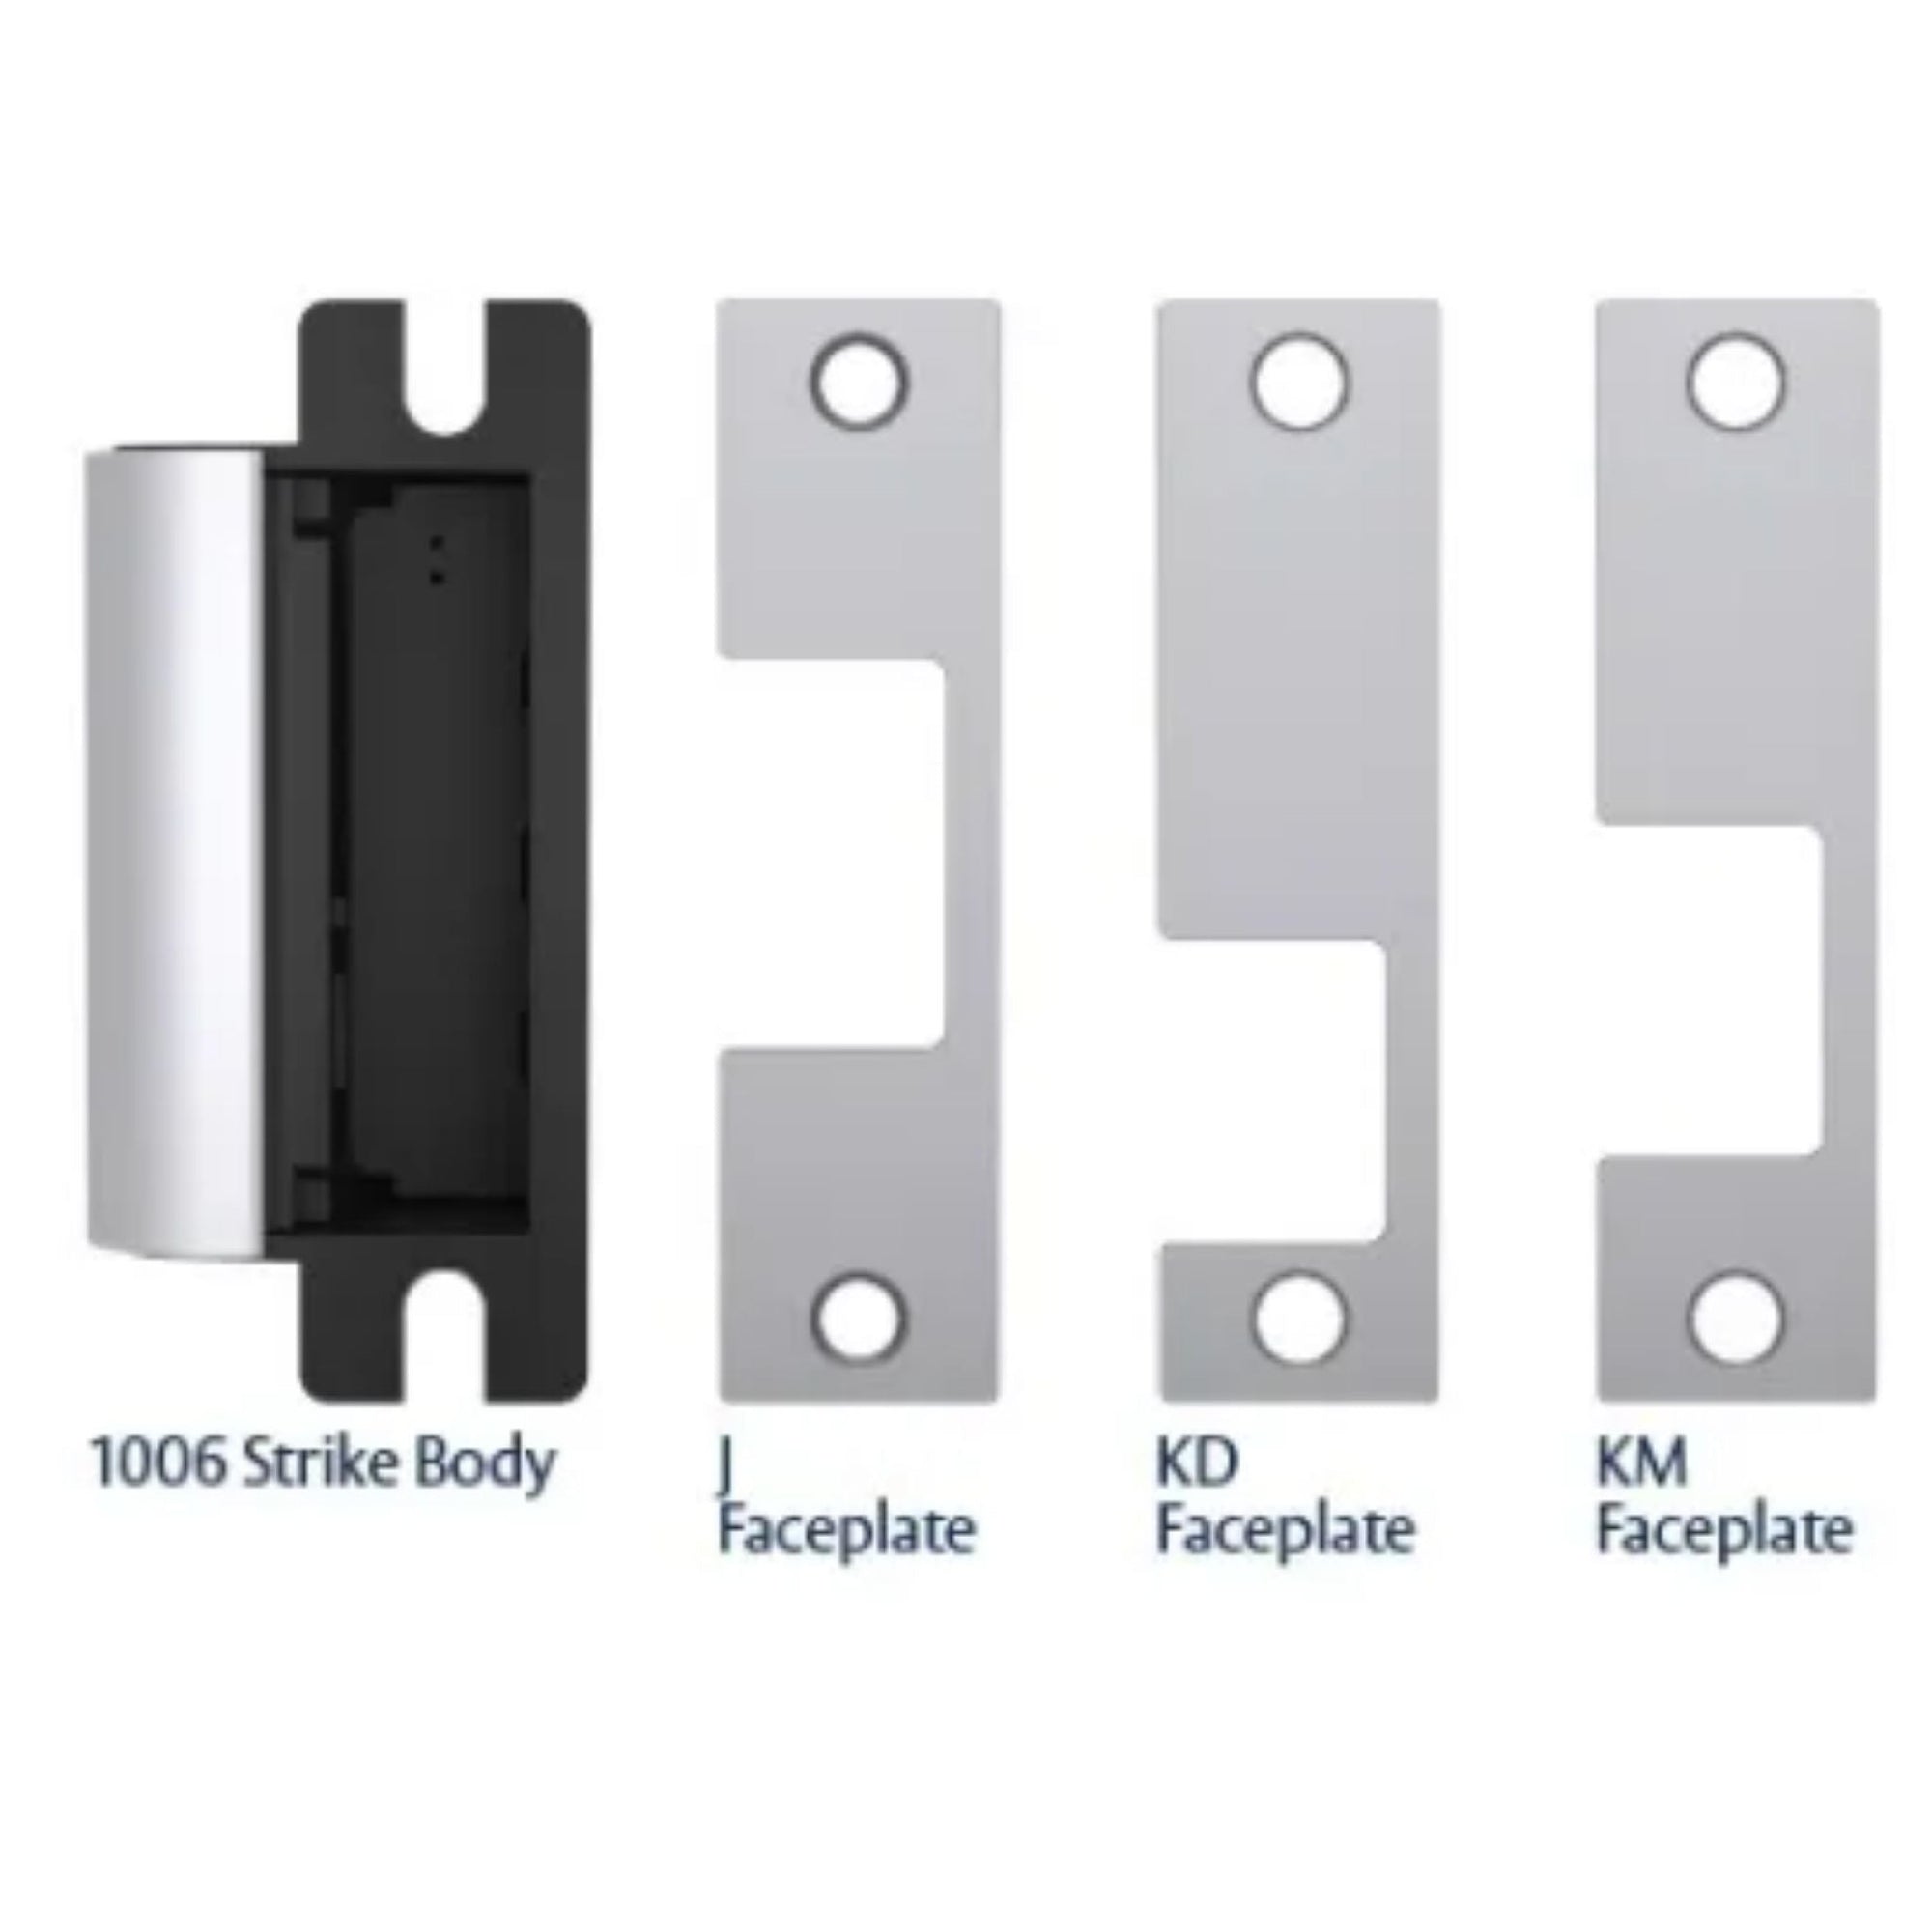 HES 1006CLB 630 Complete Pac Electric Strike Includes 1006 Strike Body, 3 Faceplates (J-Option, KD-Option & KM-Option) and All Mounting Hardware Satin Stainless Steel Electric Strikes Fail Secure or Fail Safe Strikes - The Lock Source